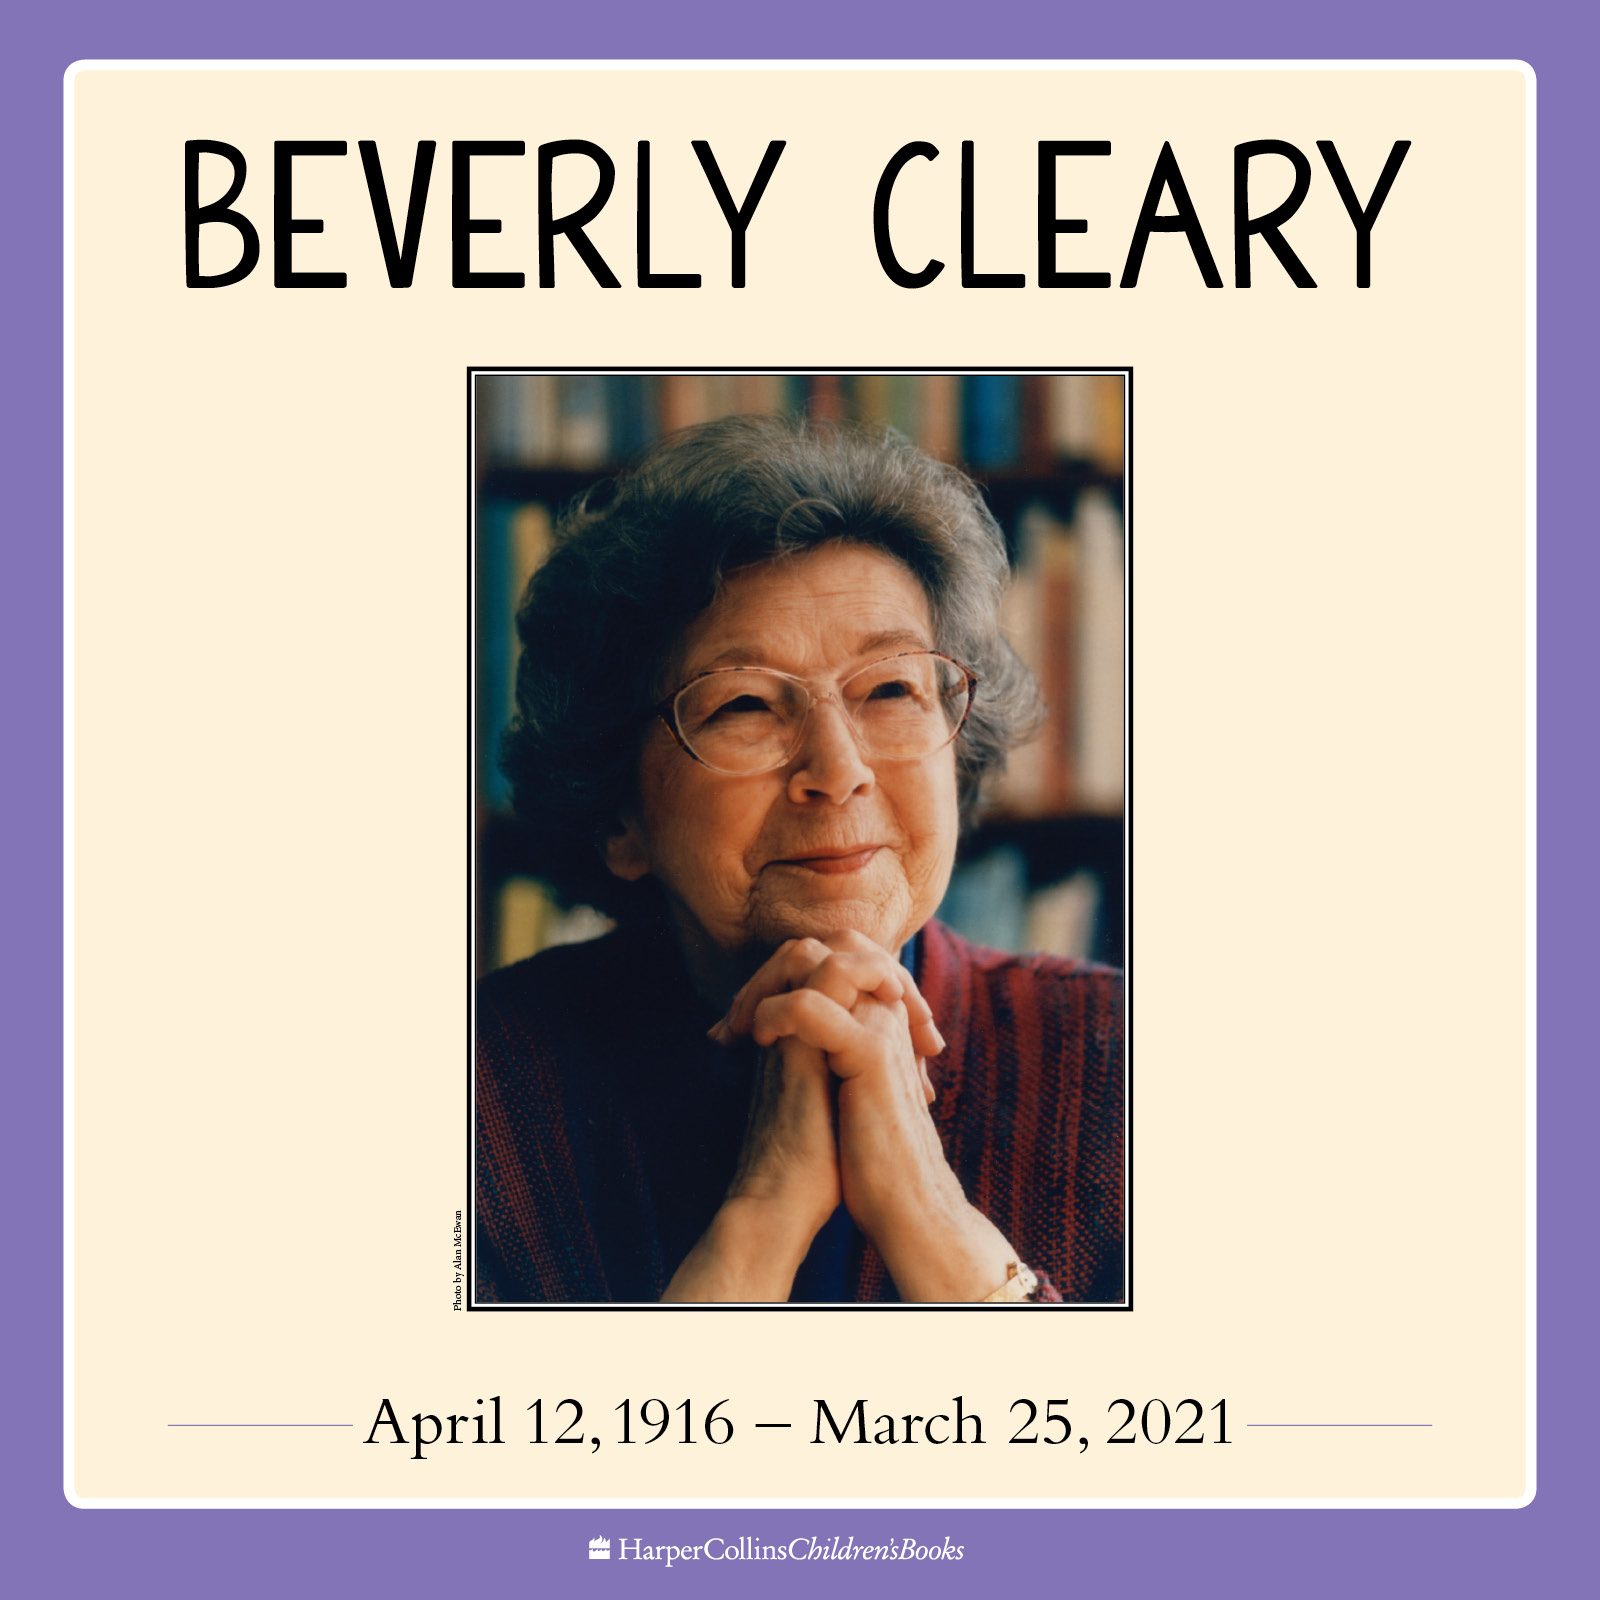 Popular children’s book author Beverly Cleary dies at 104